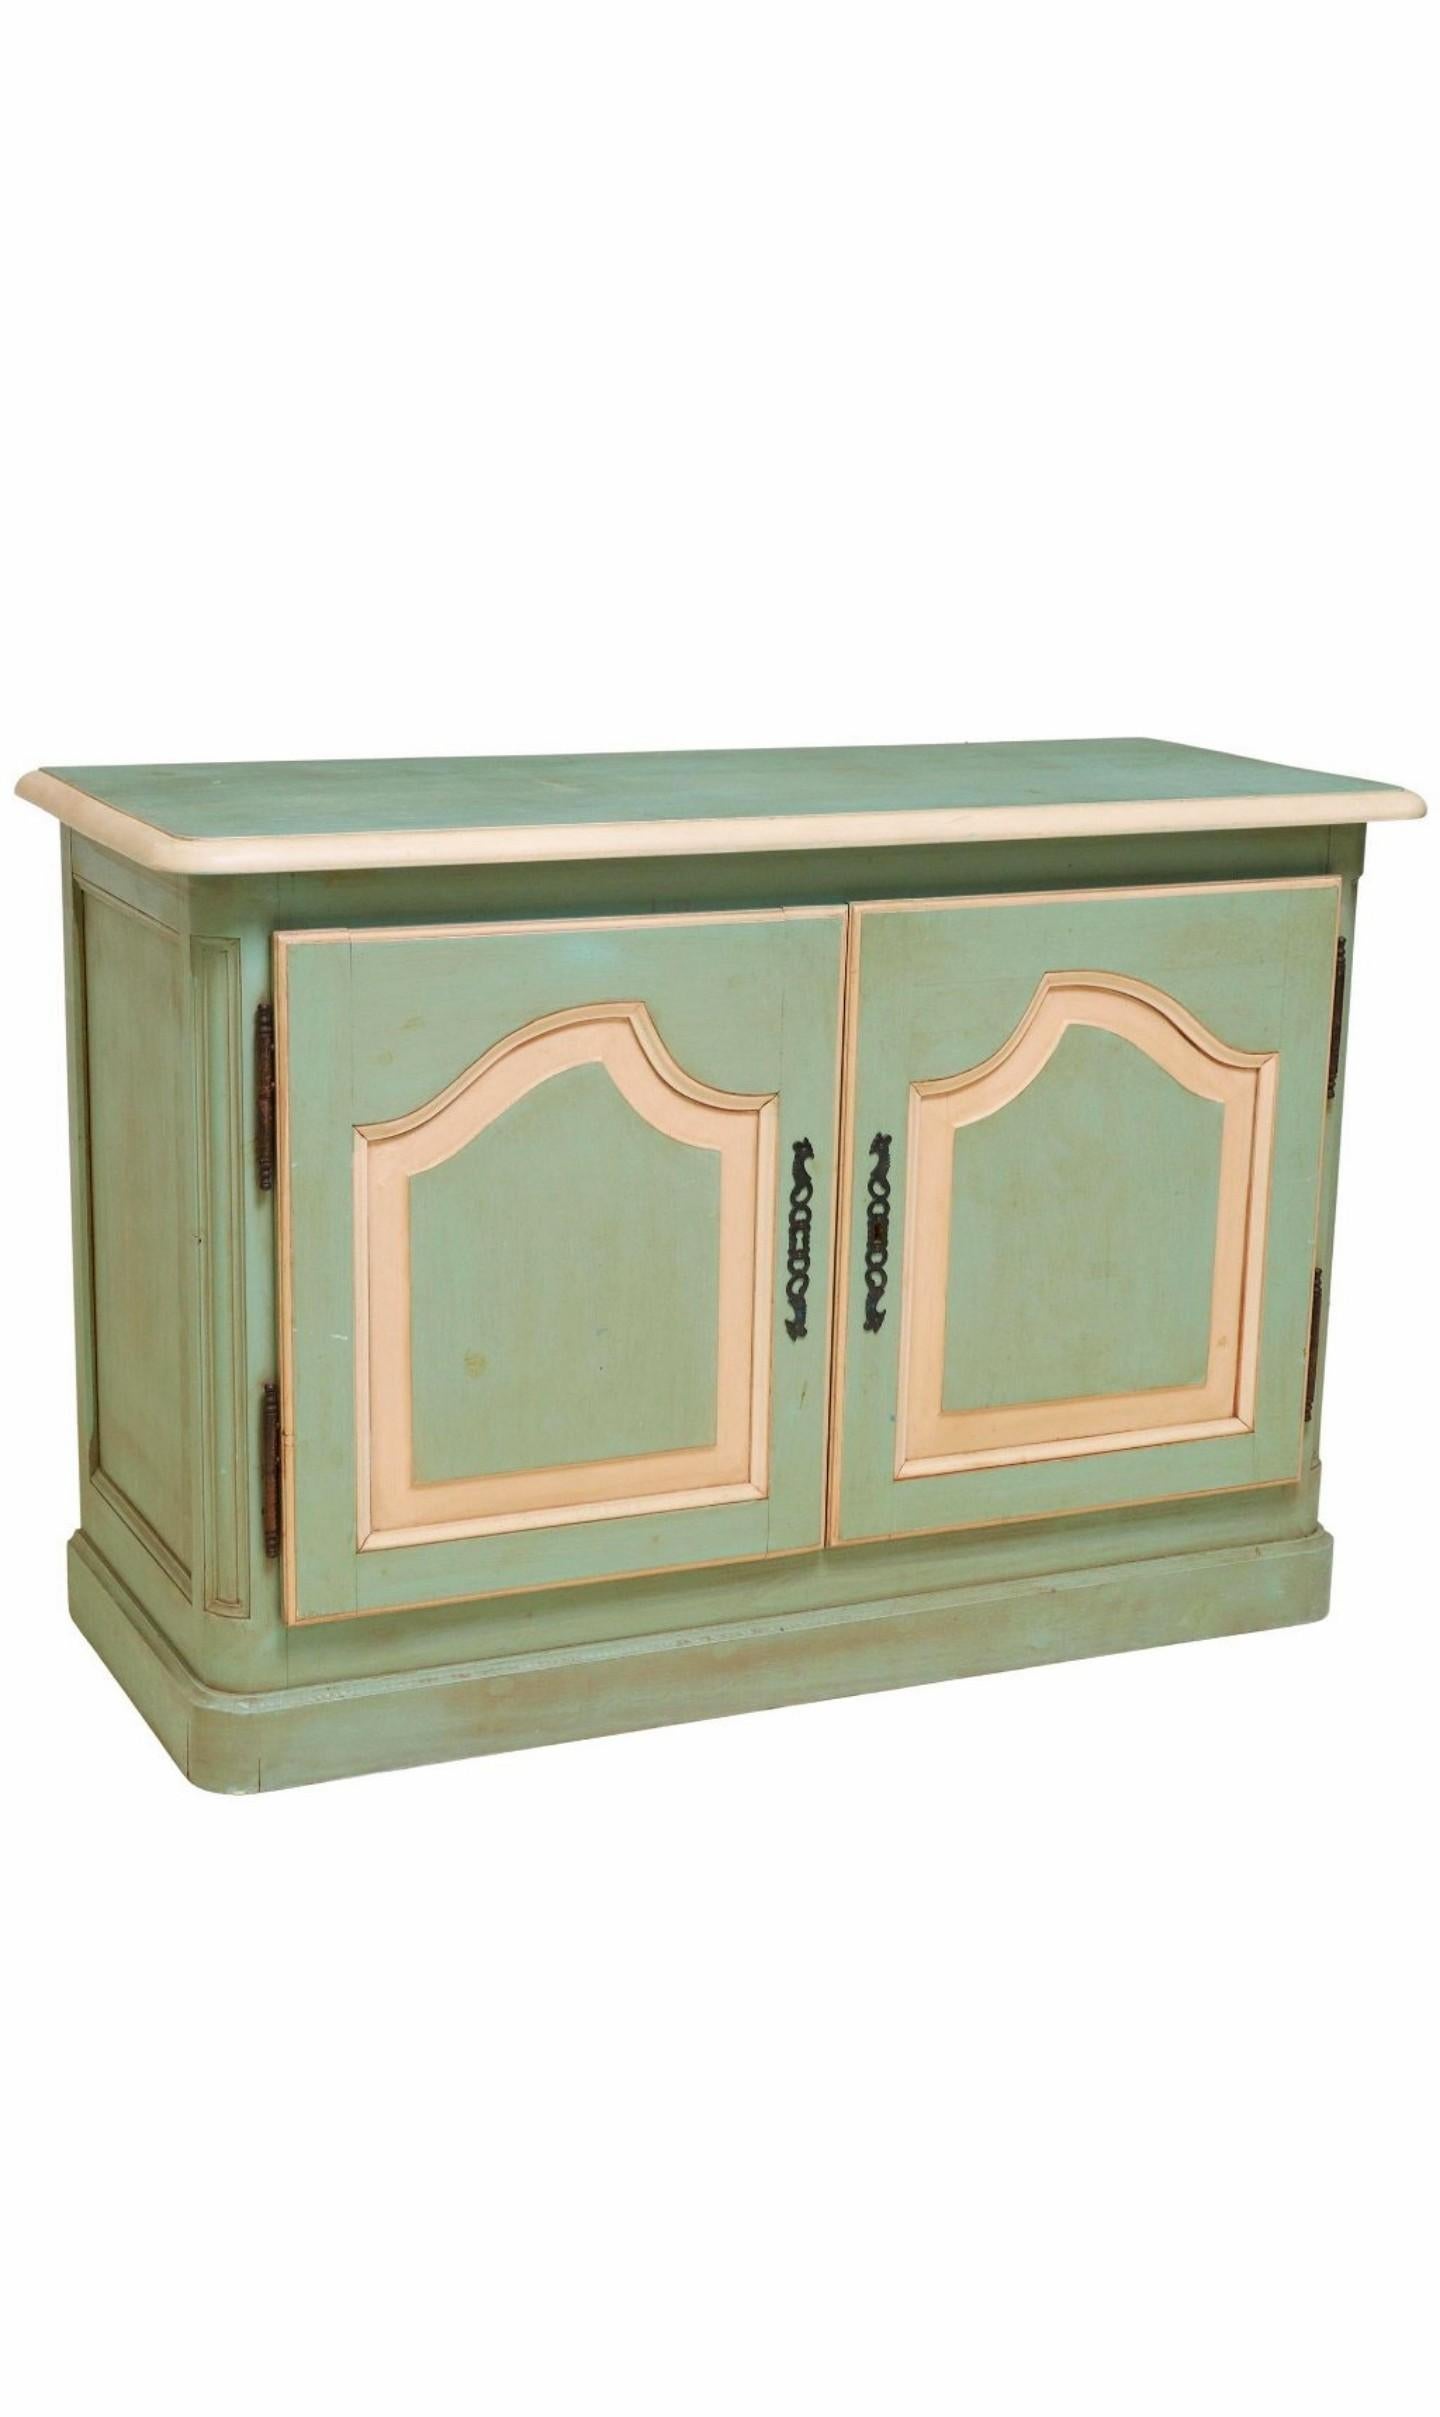 Country French Provincial Louis XV Style Painted Sideboard In Good Condition For Sale In Forney, TX